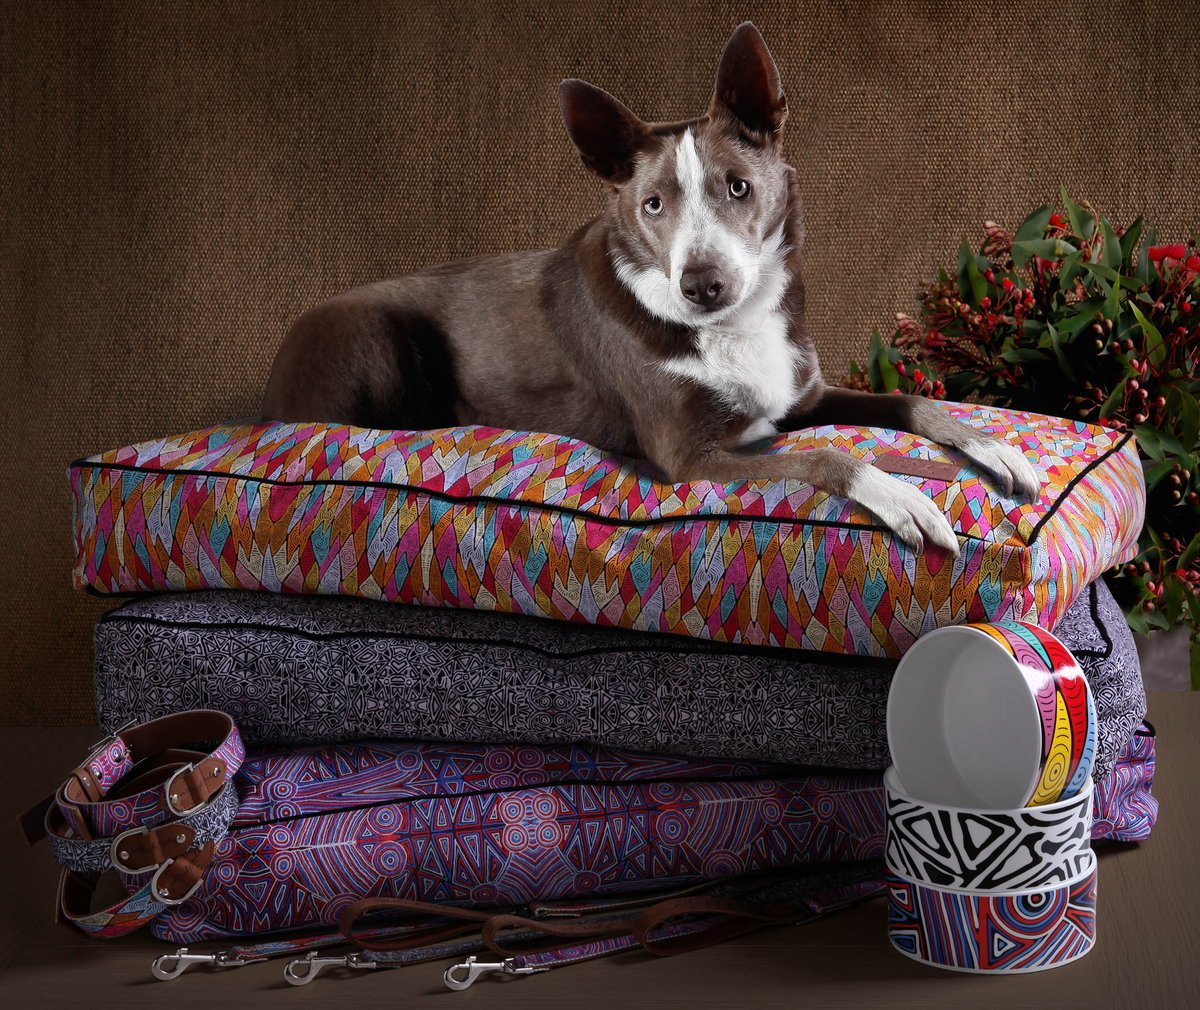 dog on beds with bowls